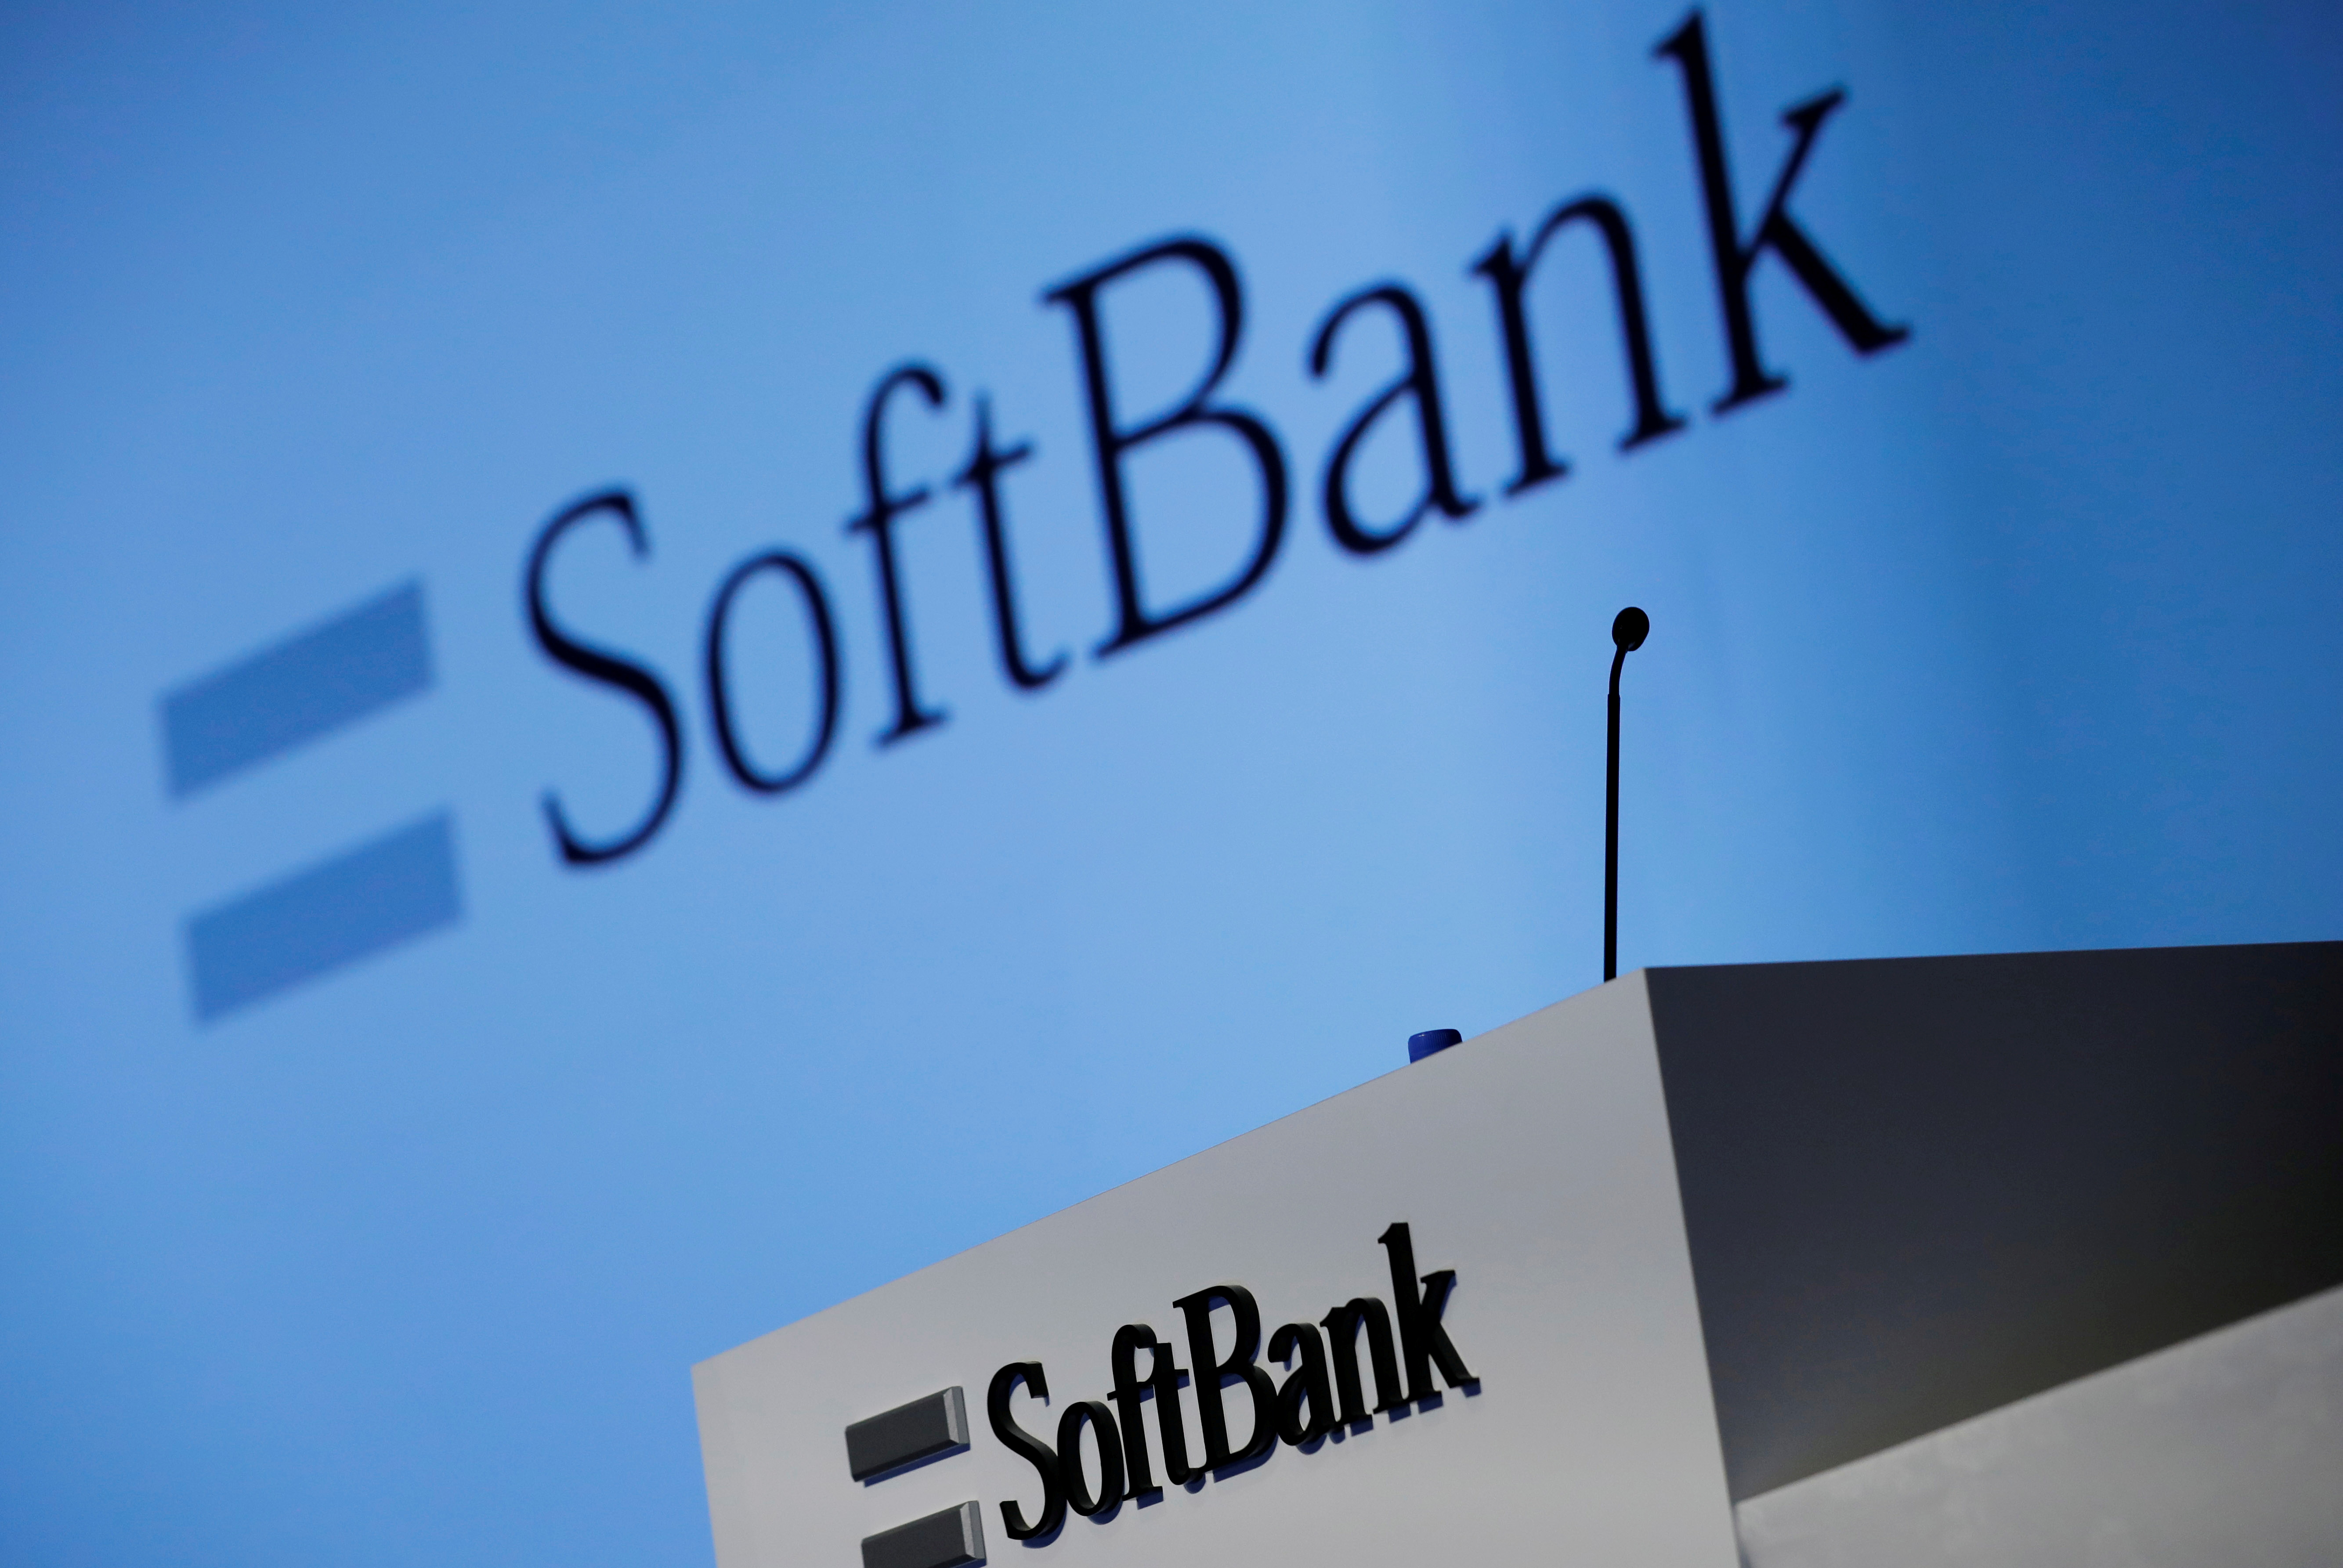 SoftBank Corp's logo is pictured at a news conference in Tokyo, Japan, February 4, 2021. REUTERS/Kim Kyung-Hoon/File Photo